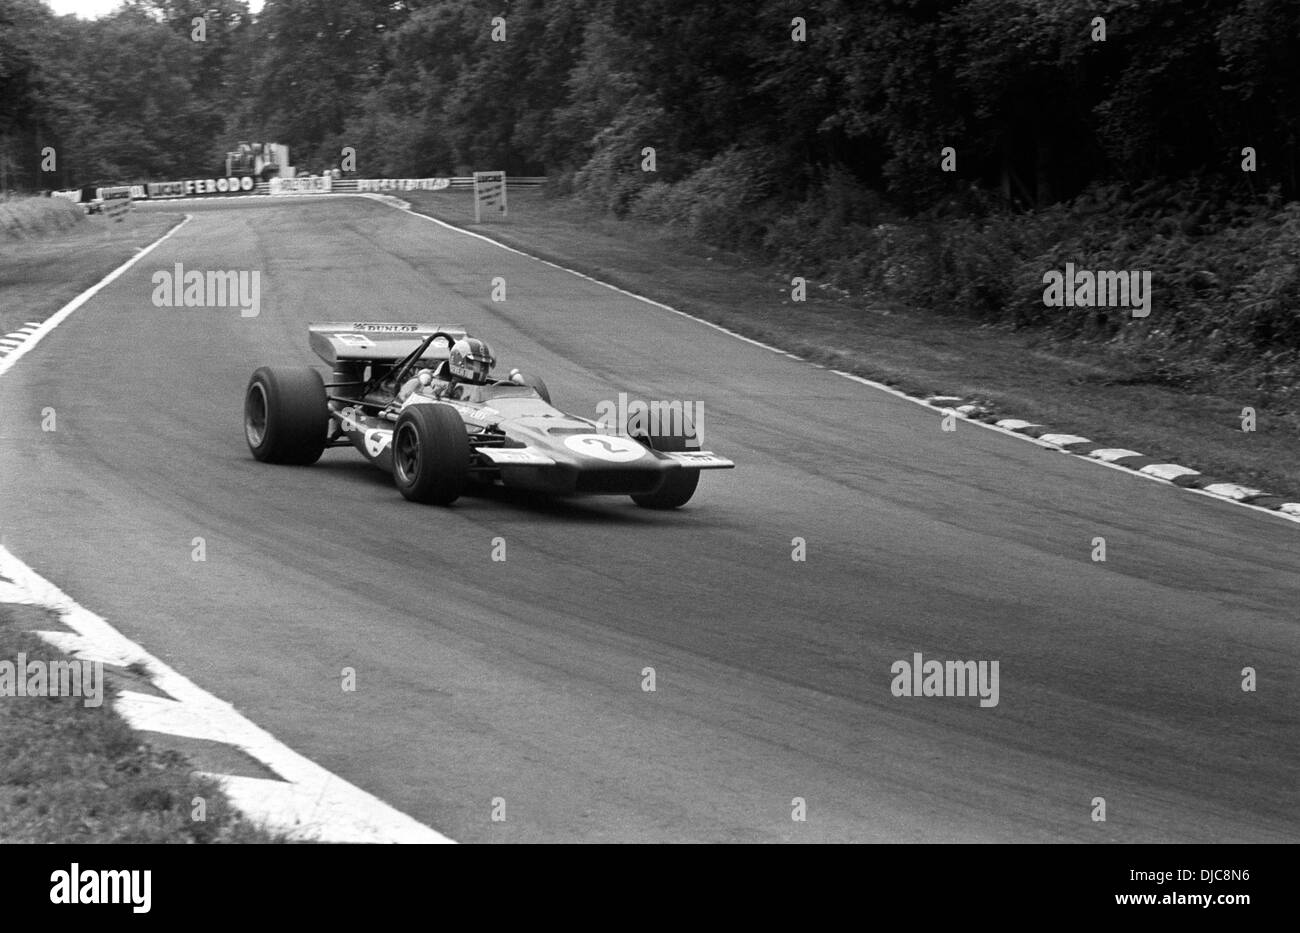 Francois Cevert in the Tyrrell March 701 at Stirling's Bend. British GP, Brands Hatch, England 18 July 1970. Stock Photo